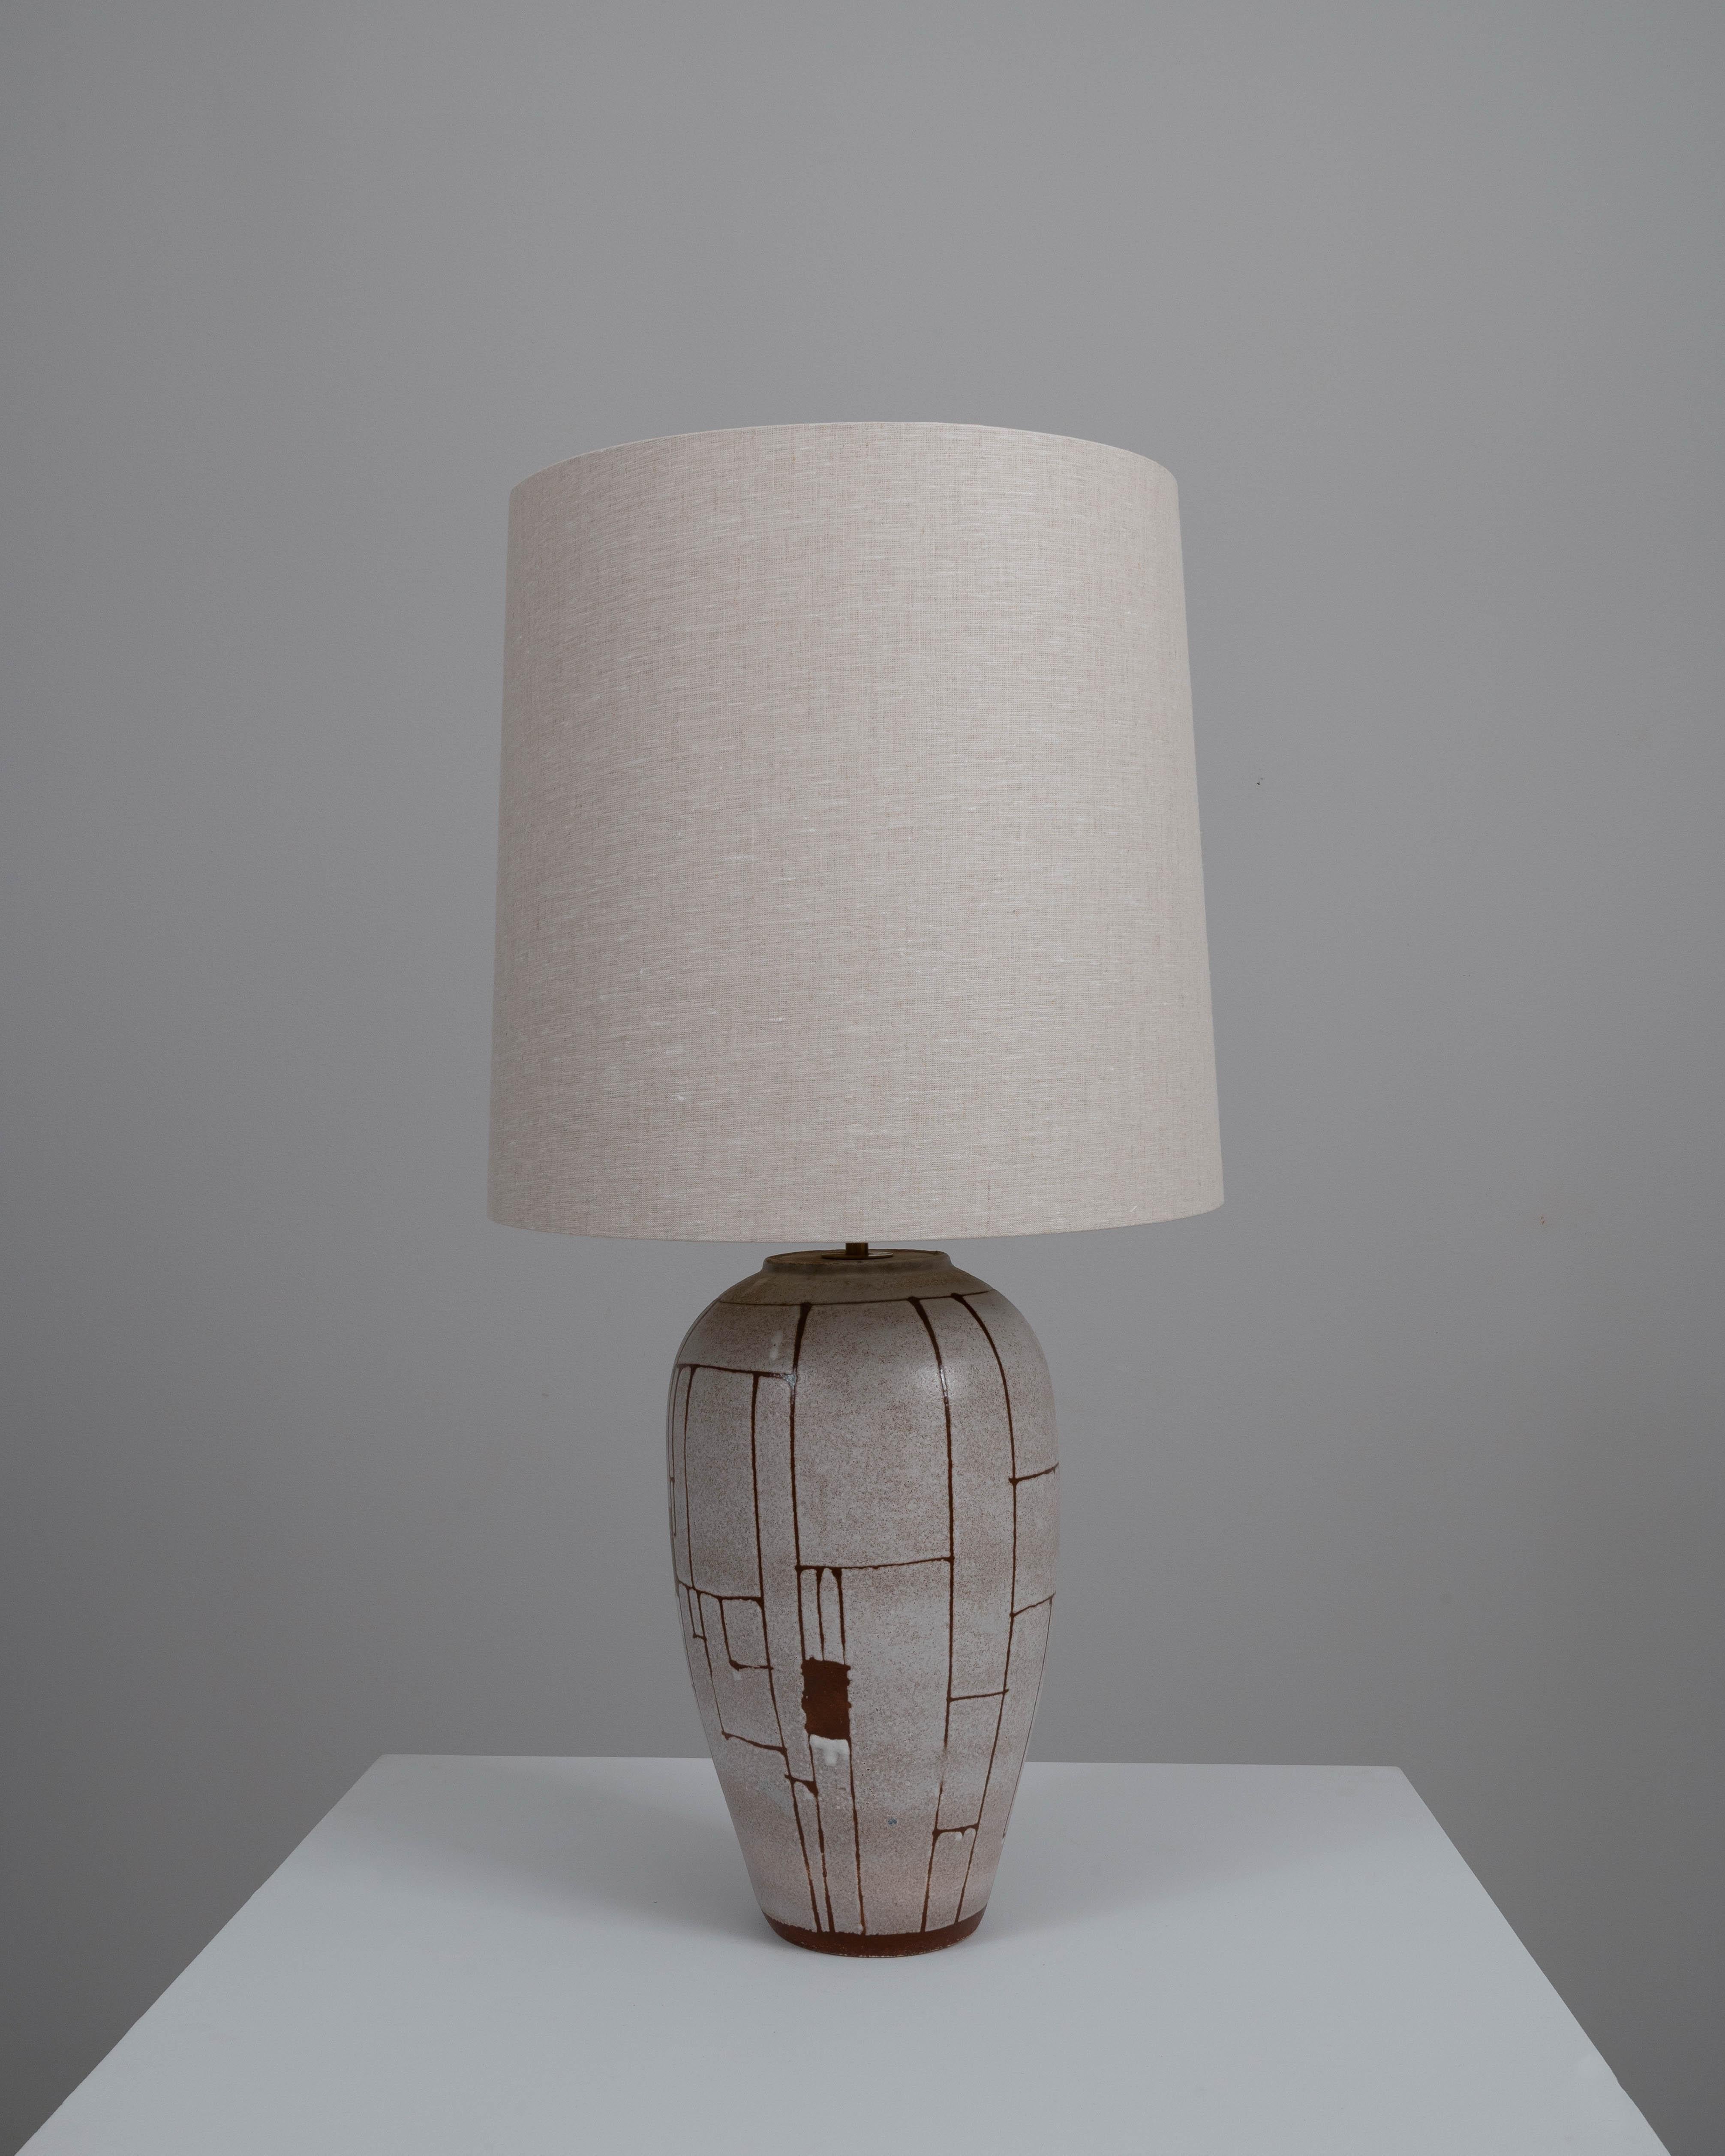 Elevate your home decor with this exquisite 20th-century German ceramic table lamp, where minimalist design meets rustic charm. The lamp's base boasts a beautifully cracked glaze effect in a neutral palette, with understated brown accents